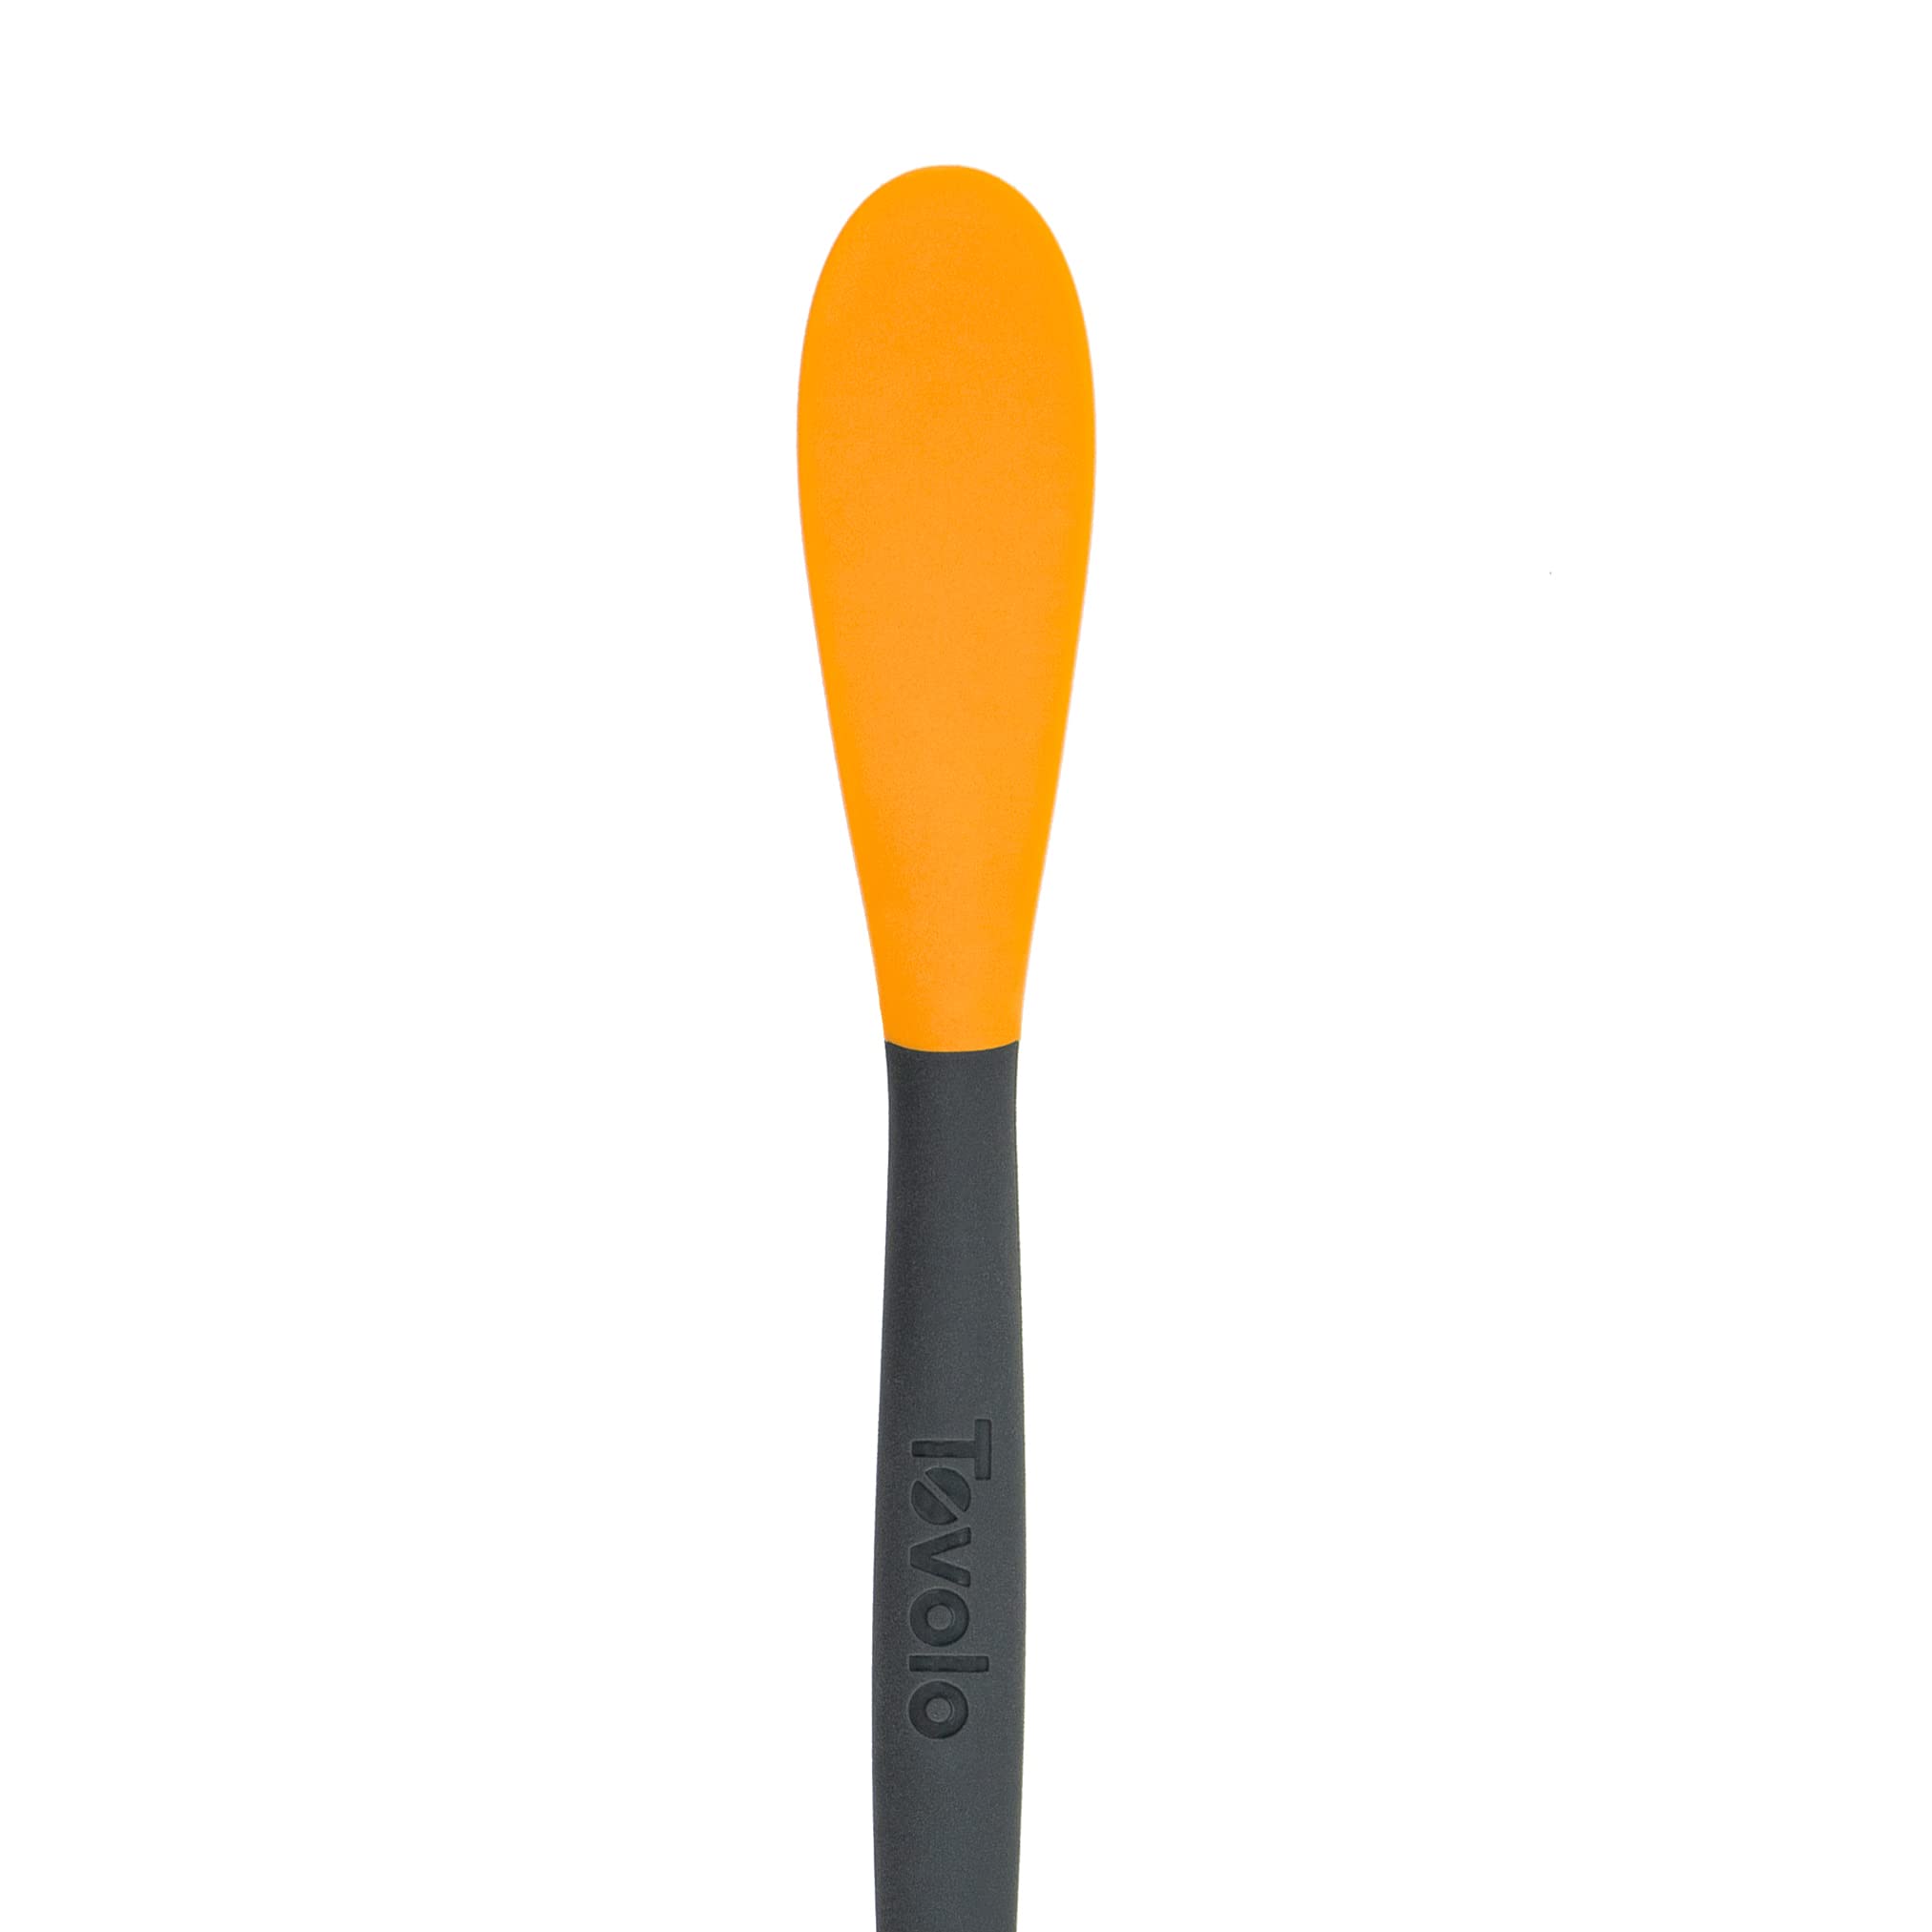 Tovolo 2-In-1 Citrus Tool, 2-In-1 Orange Peeler Tool With Non-Slip Handle, Double-Ended Citrus Peeler for Kitchen, Citrus Pith Slicer & Removal Paddle Kitchen Tool Large